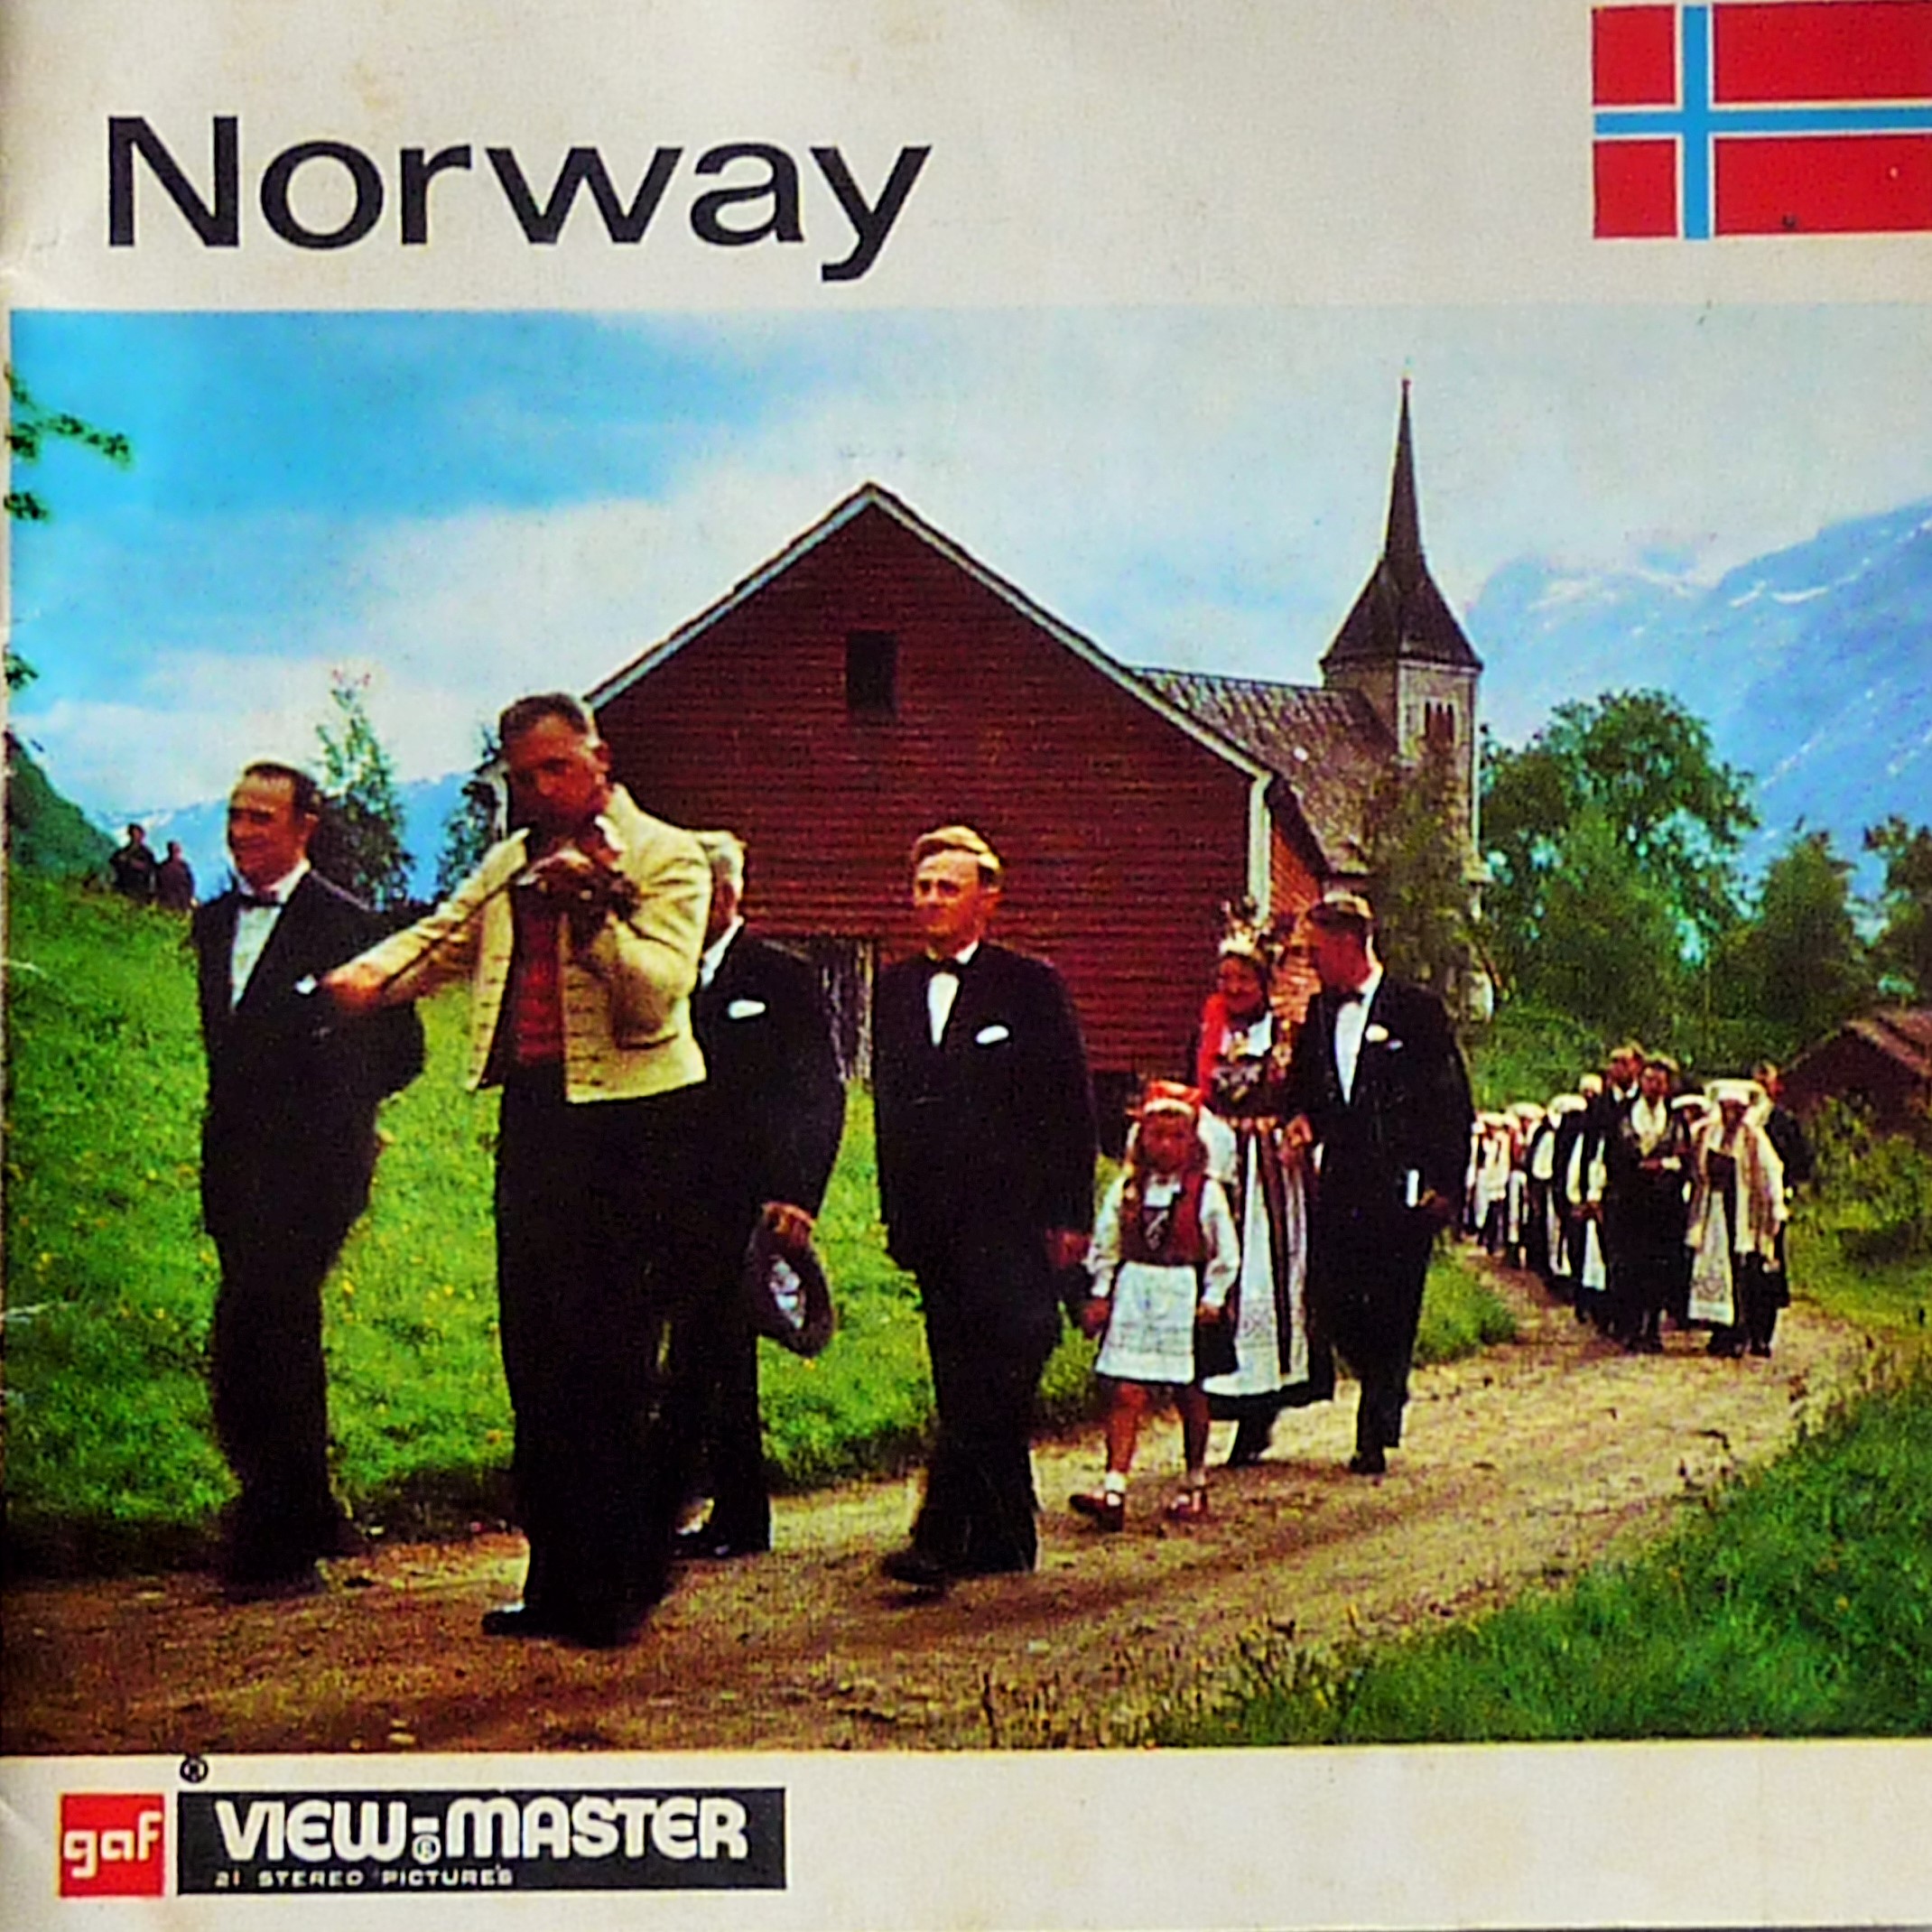 The cover of an accompanying booklet to a Viewmaster slide of images from Norway. The photo featured on the cover shows a procession of people presumably in traditional Norwegian dress walking away from what looks to be a church.